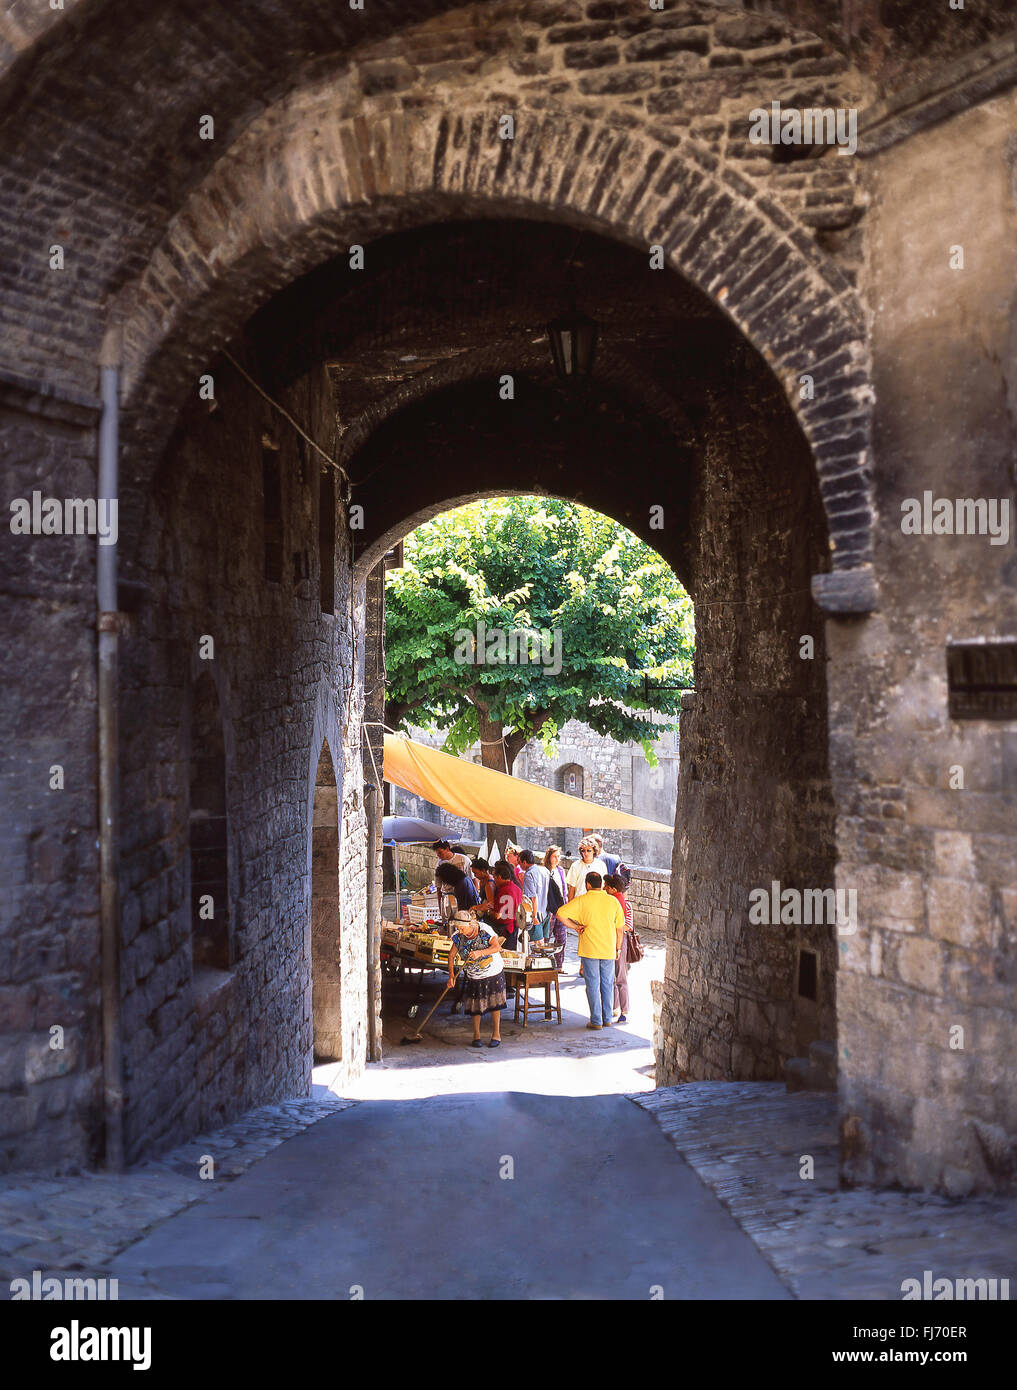 Small street market, Assisi, Province of Perugia, Umbria, Italy Stock Photo